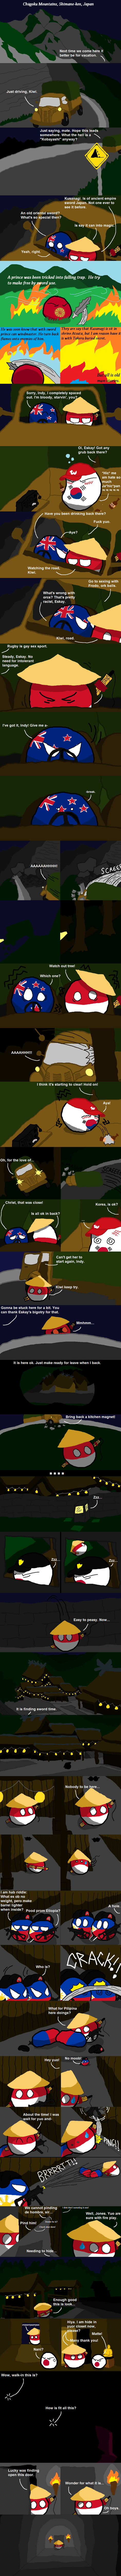 Indonesia Jones and the Sword of Ame: Part 1